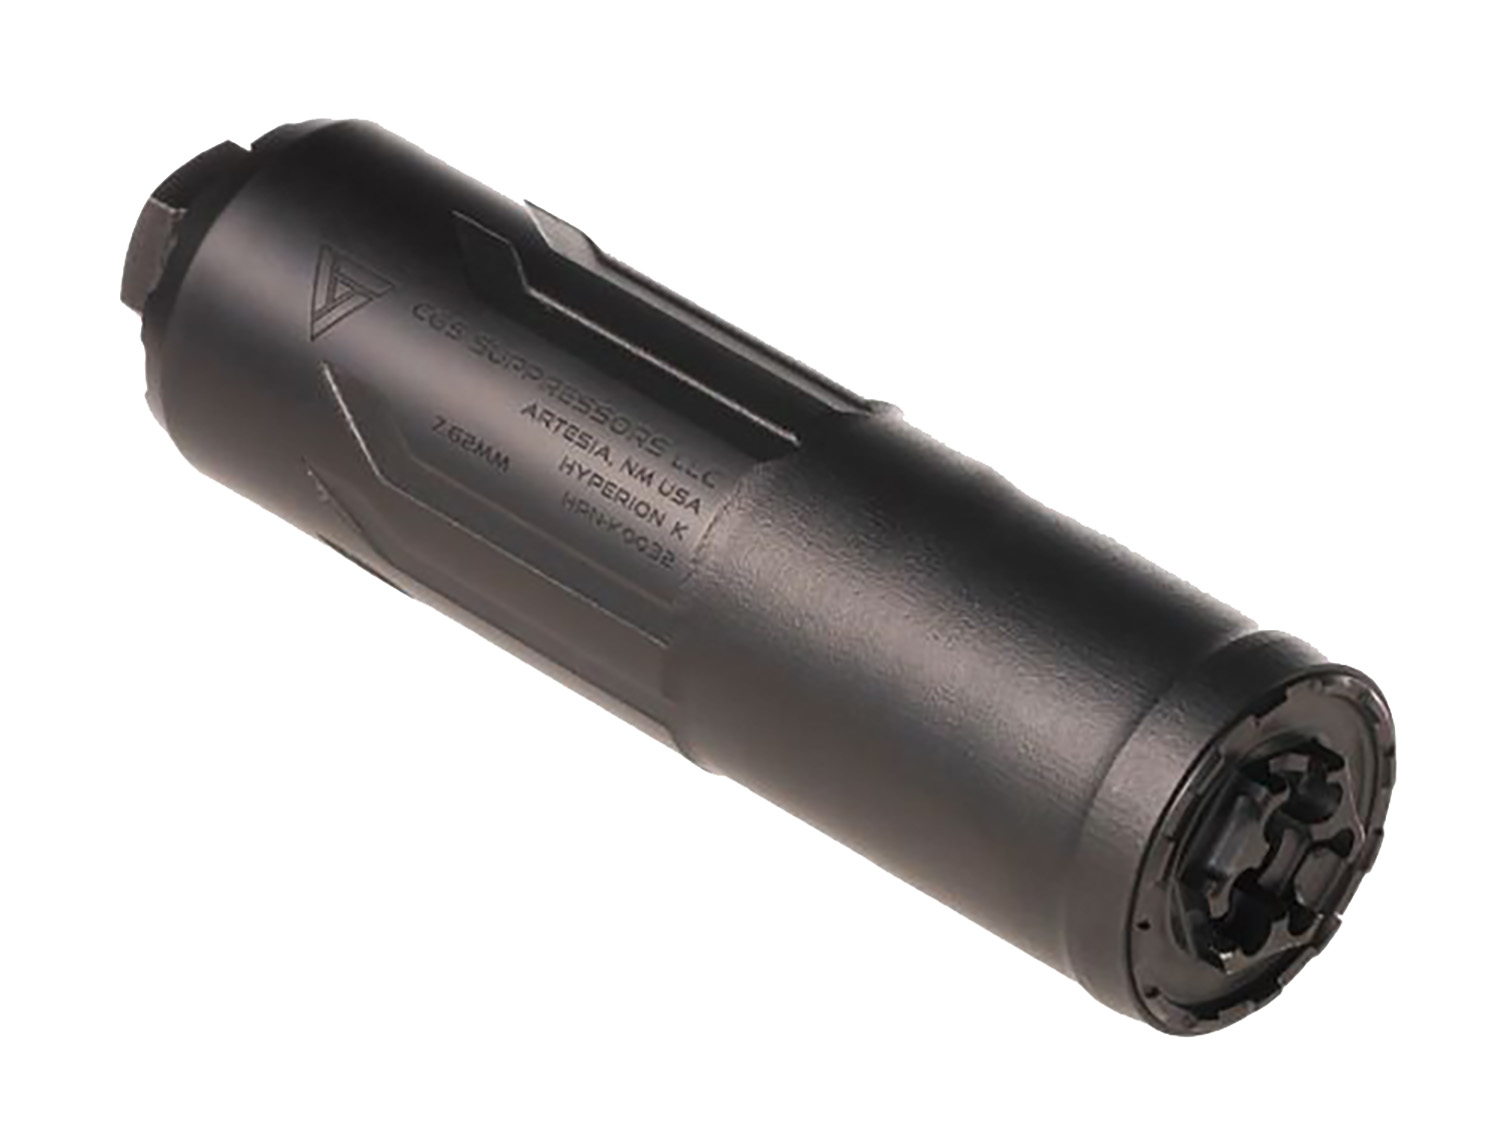 CGS SUPPRESSORS CGS-HYPERION-DT Hyperion DT 7.62x39mm 9.40